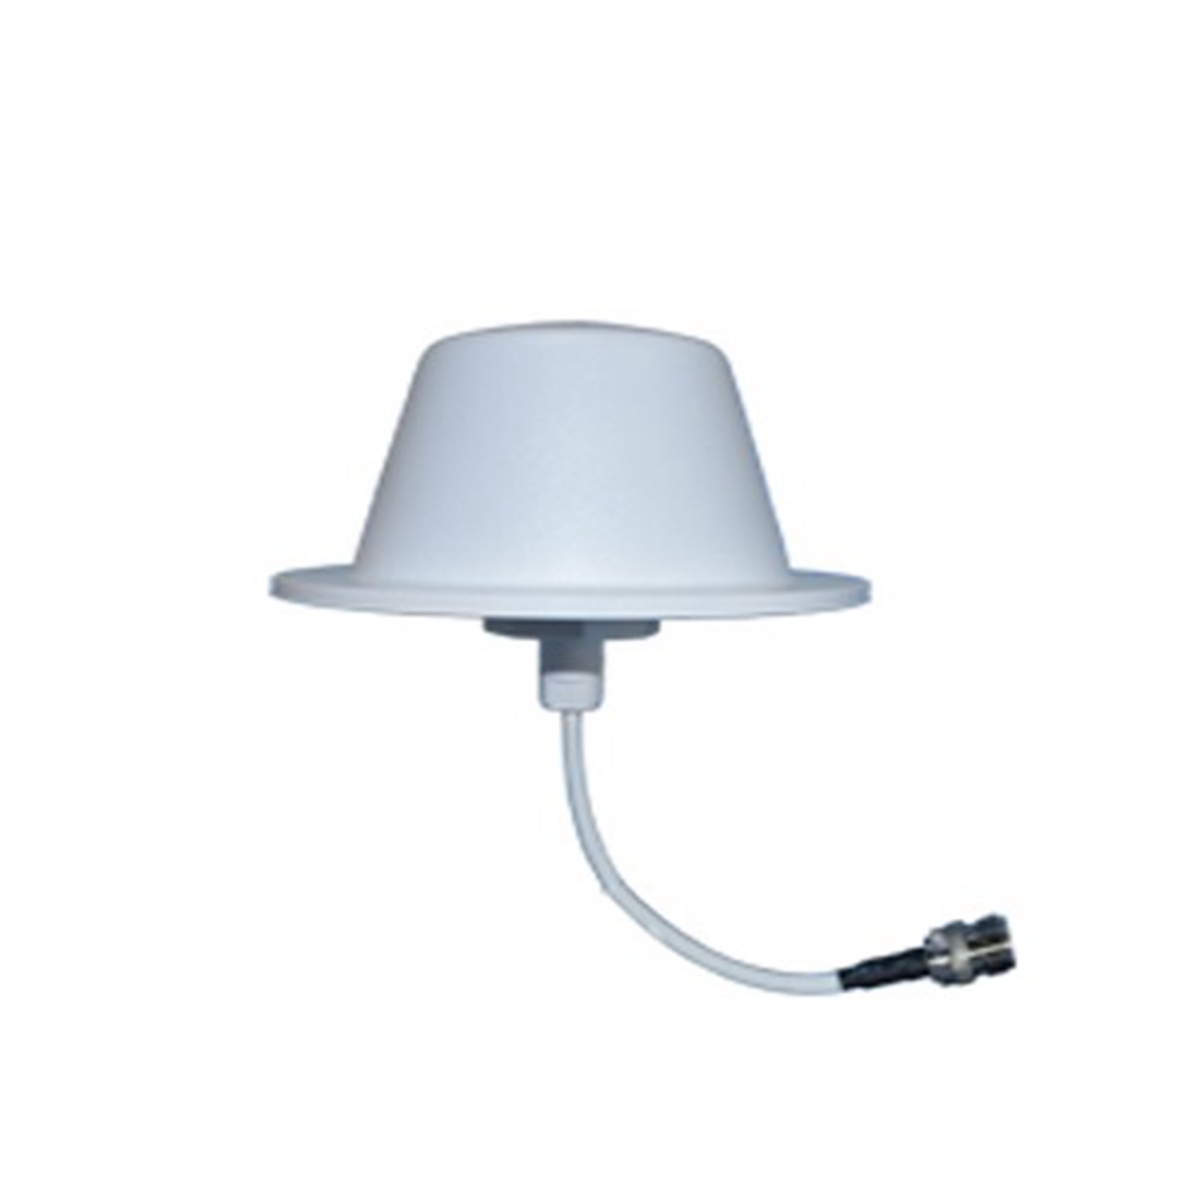 Picture of Turmode WAC24033 Ceiling WiFi Antenna for 2.4GHz